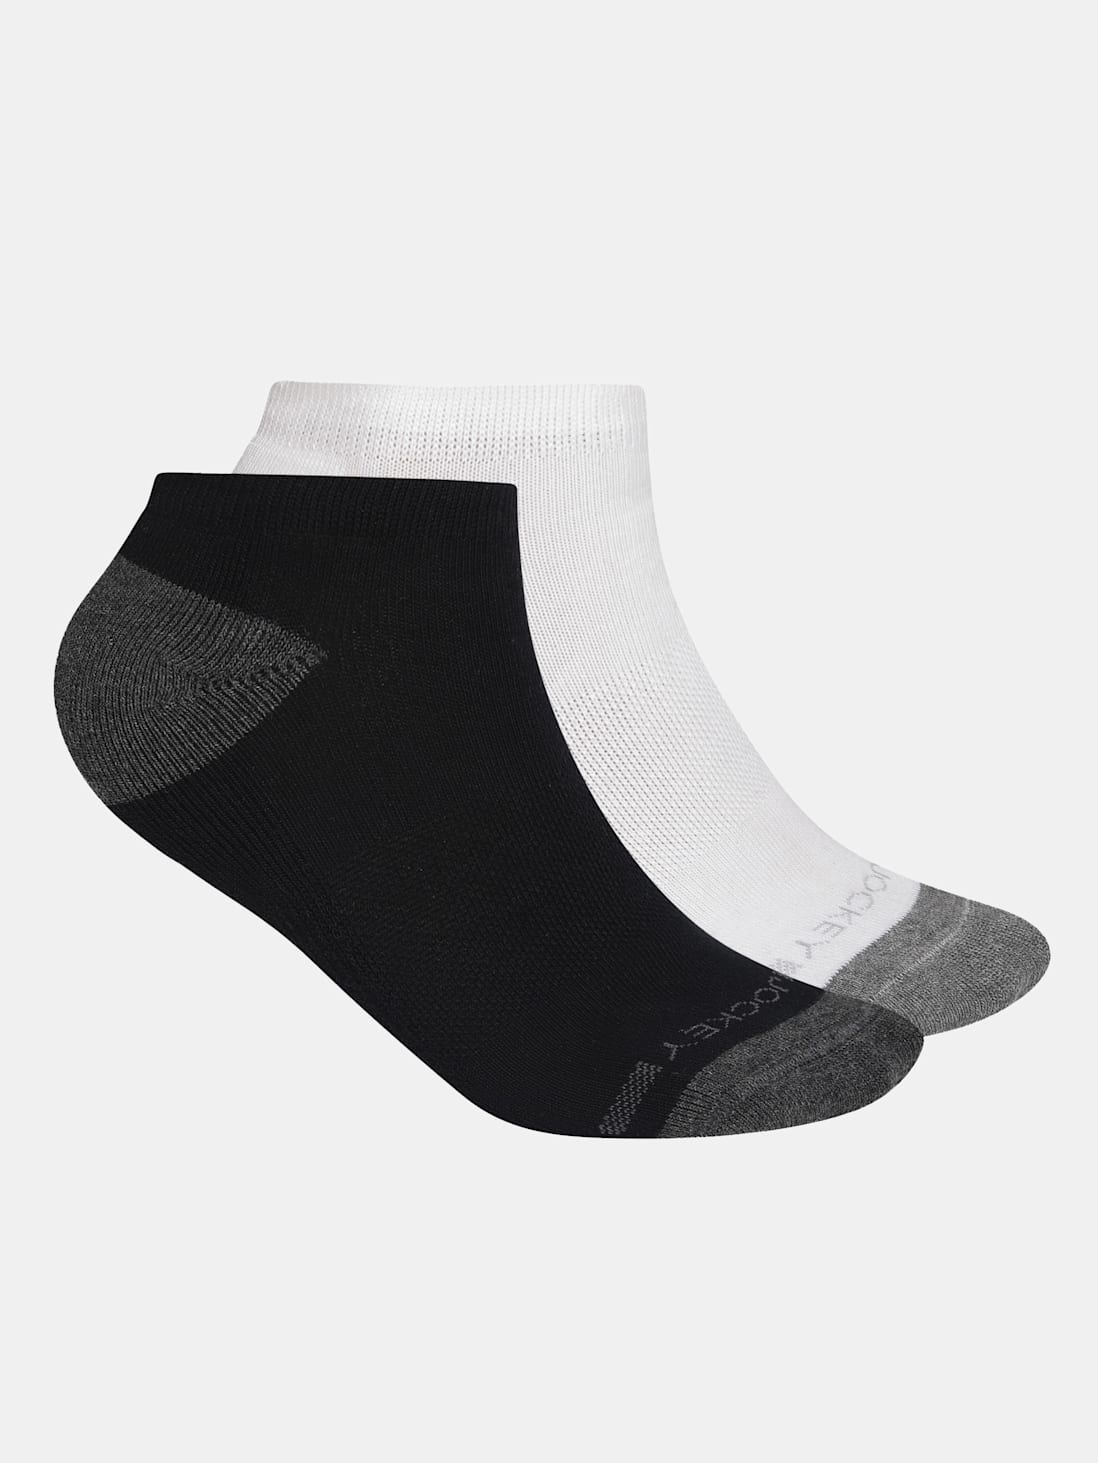 Buy Women's Cotton Nylon Blend Solid Low Show Socks with Stay Fresh ...